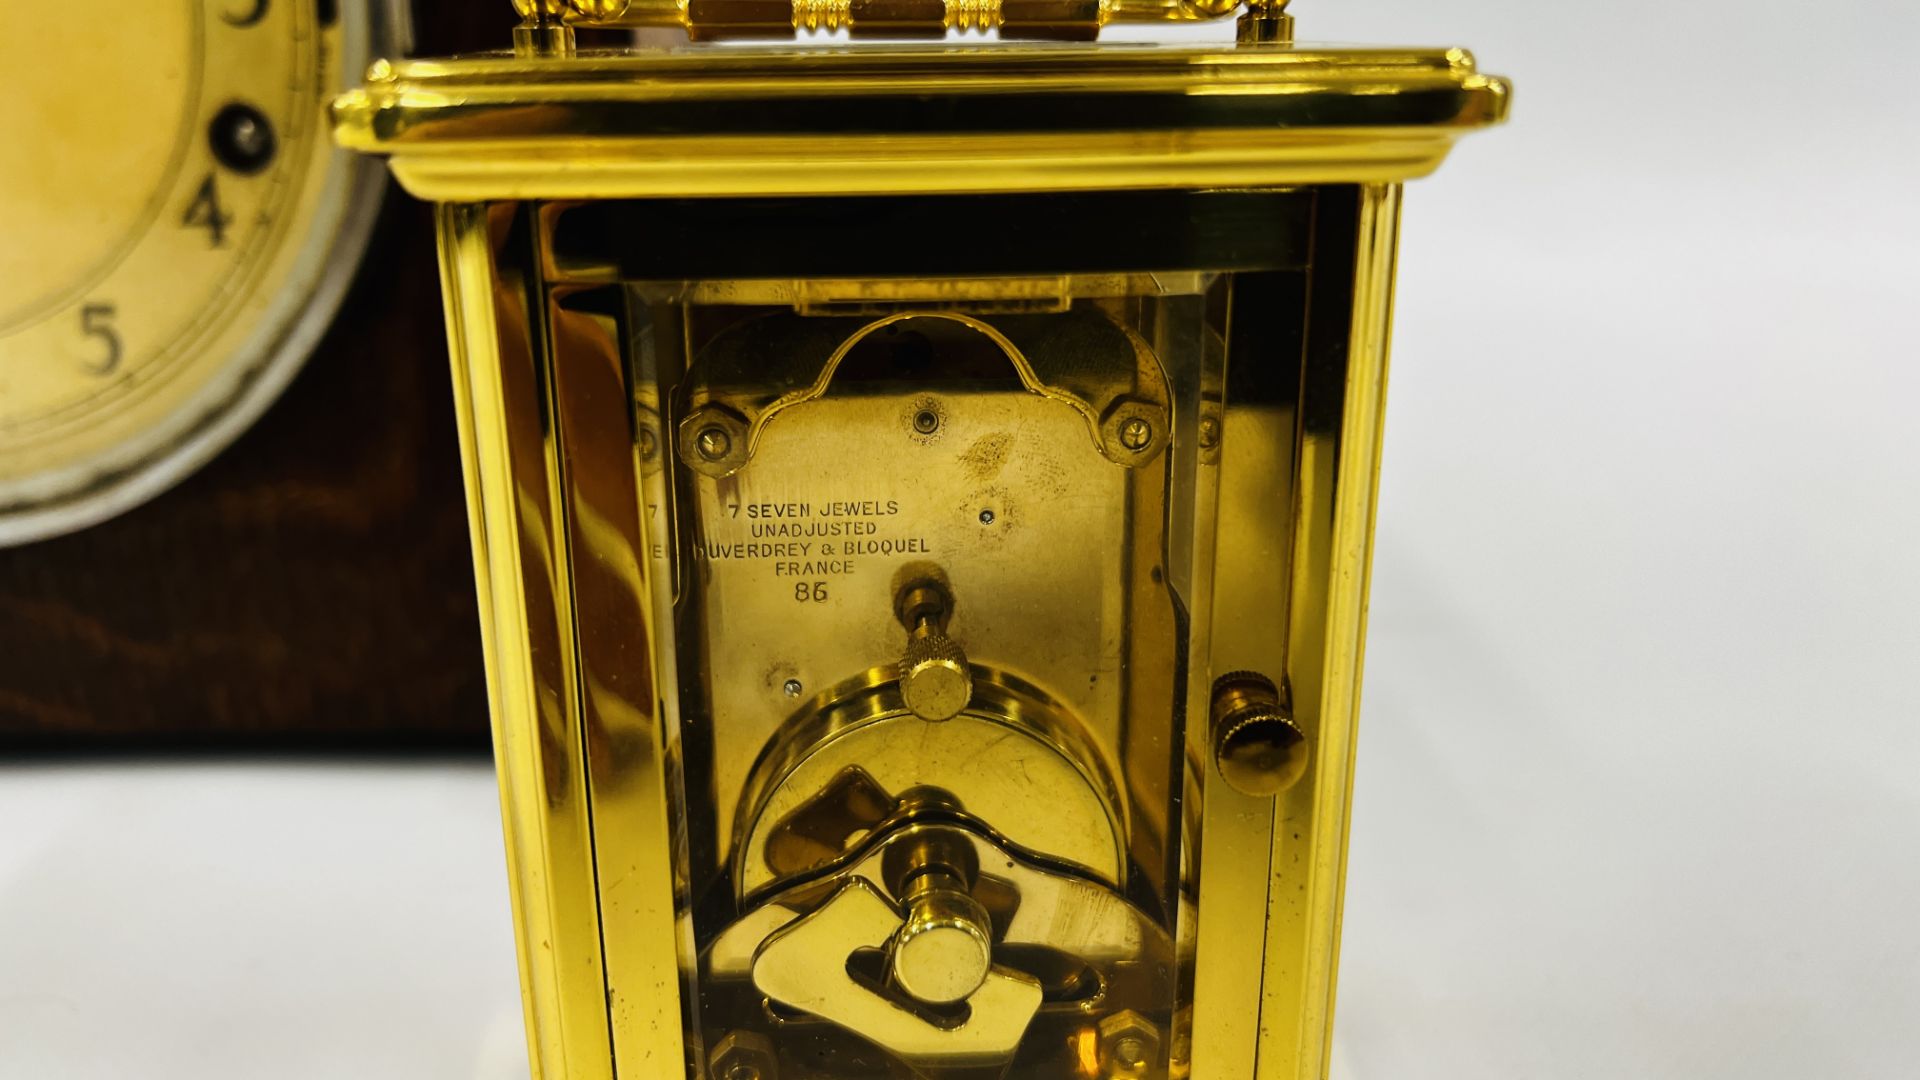 A GARROD 8 DAY MANTEL CLOCK ALONG WITH AN 8 DAY CARRIAGE CLOCK. - Image 4 of 7